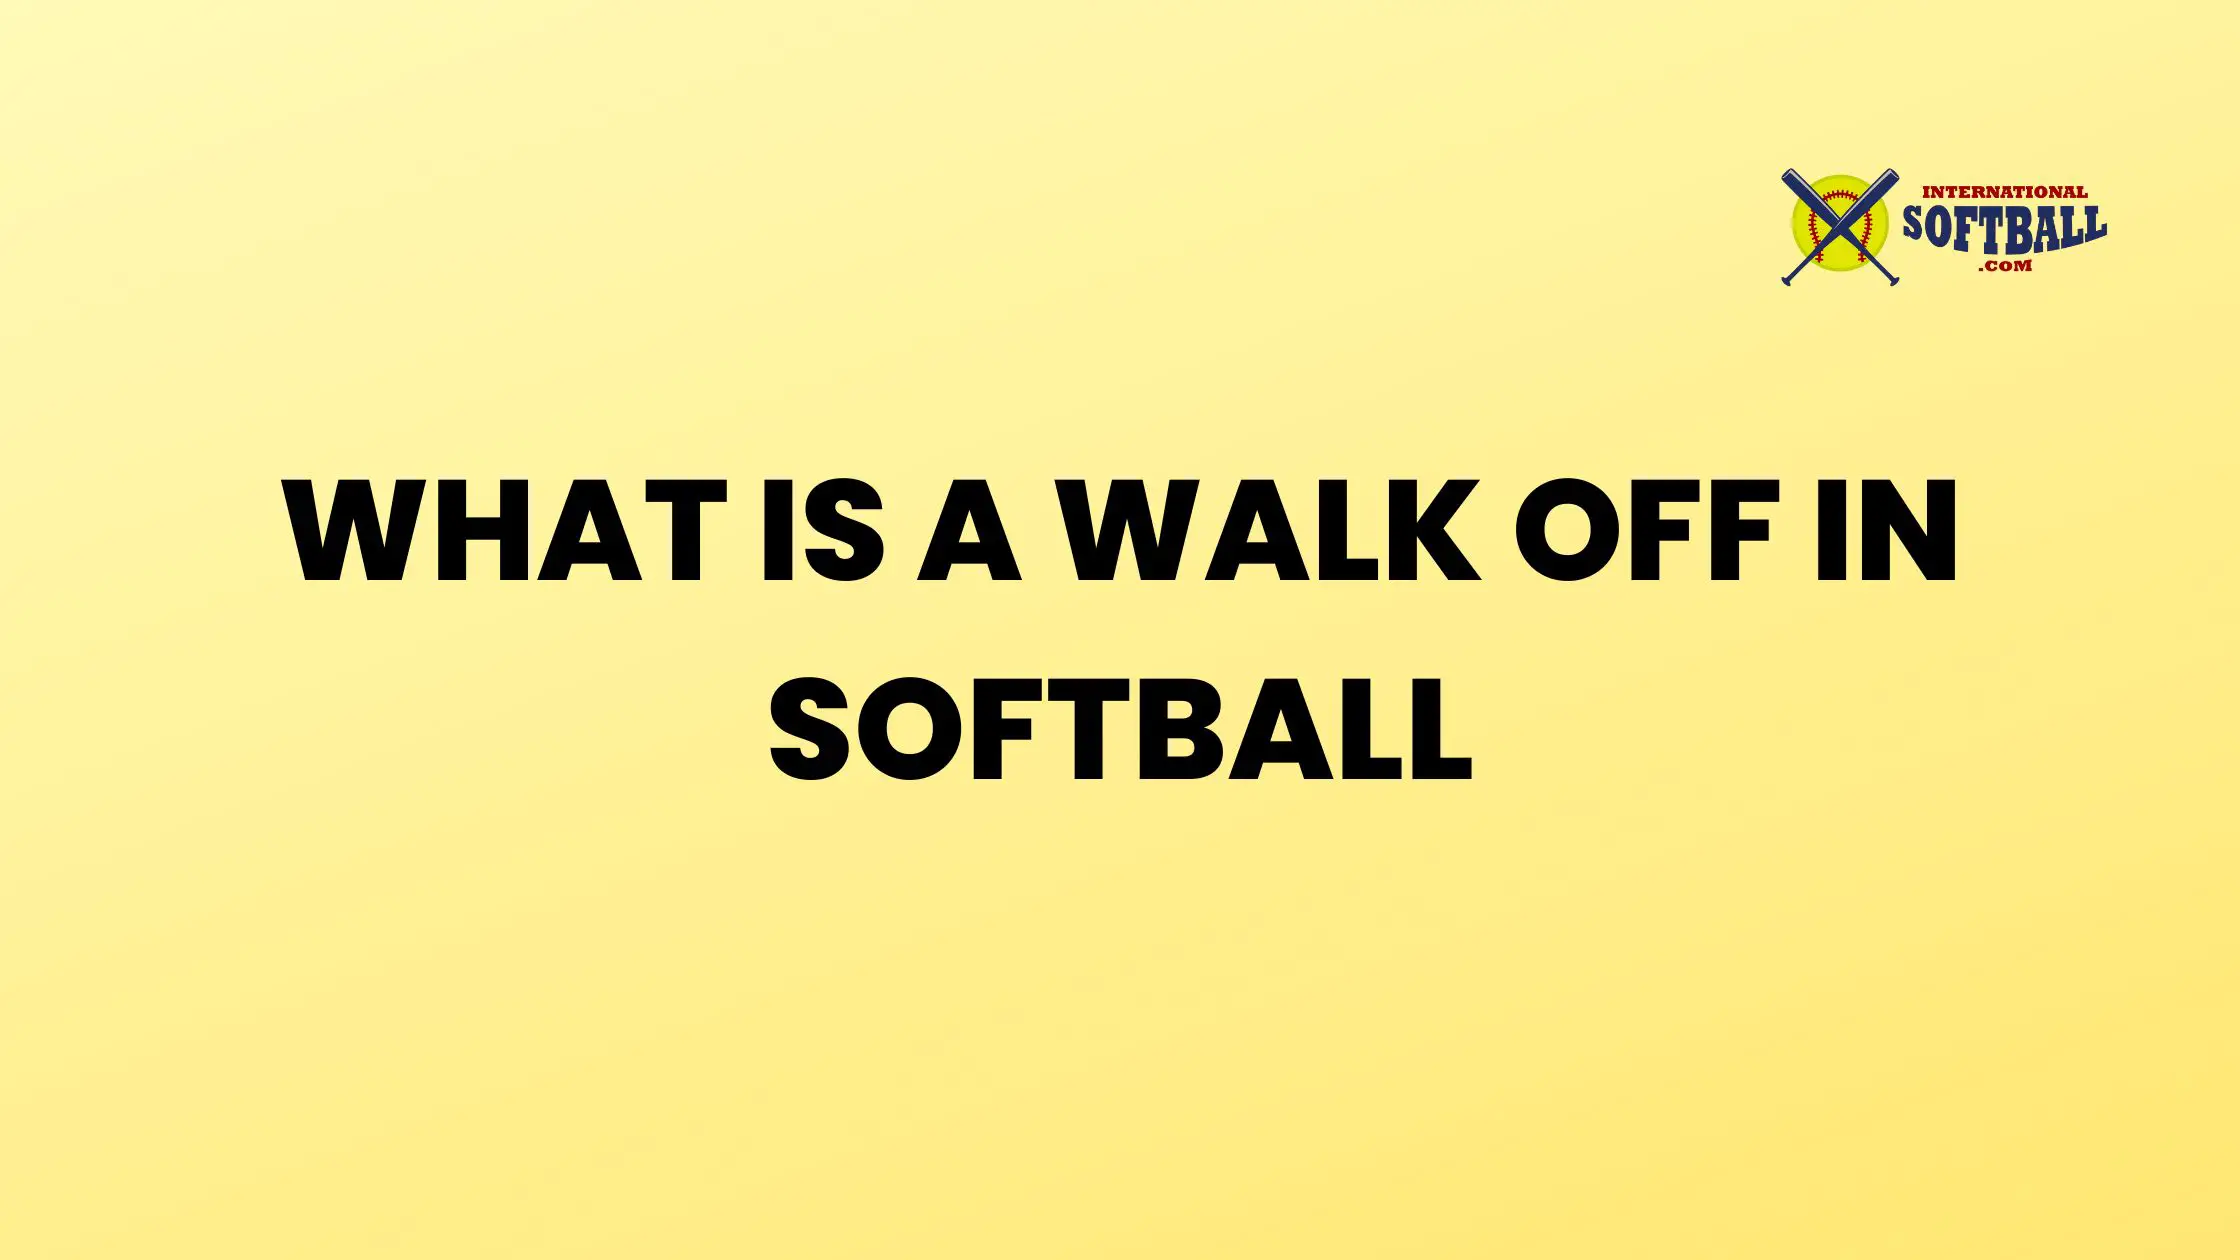 WHAT IS A WALK OFF IN SOFTBALL